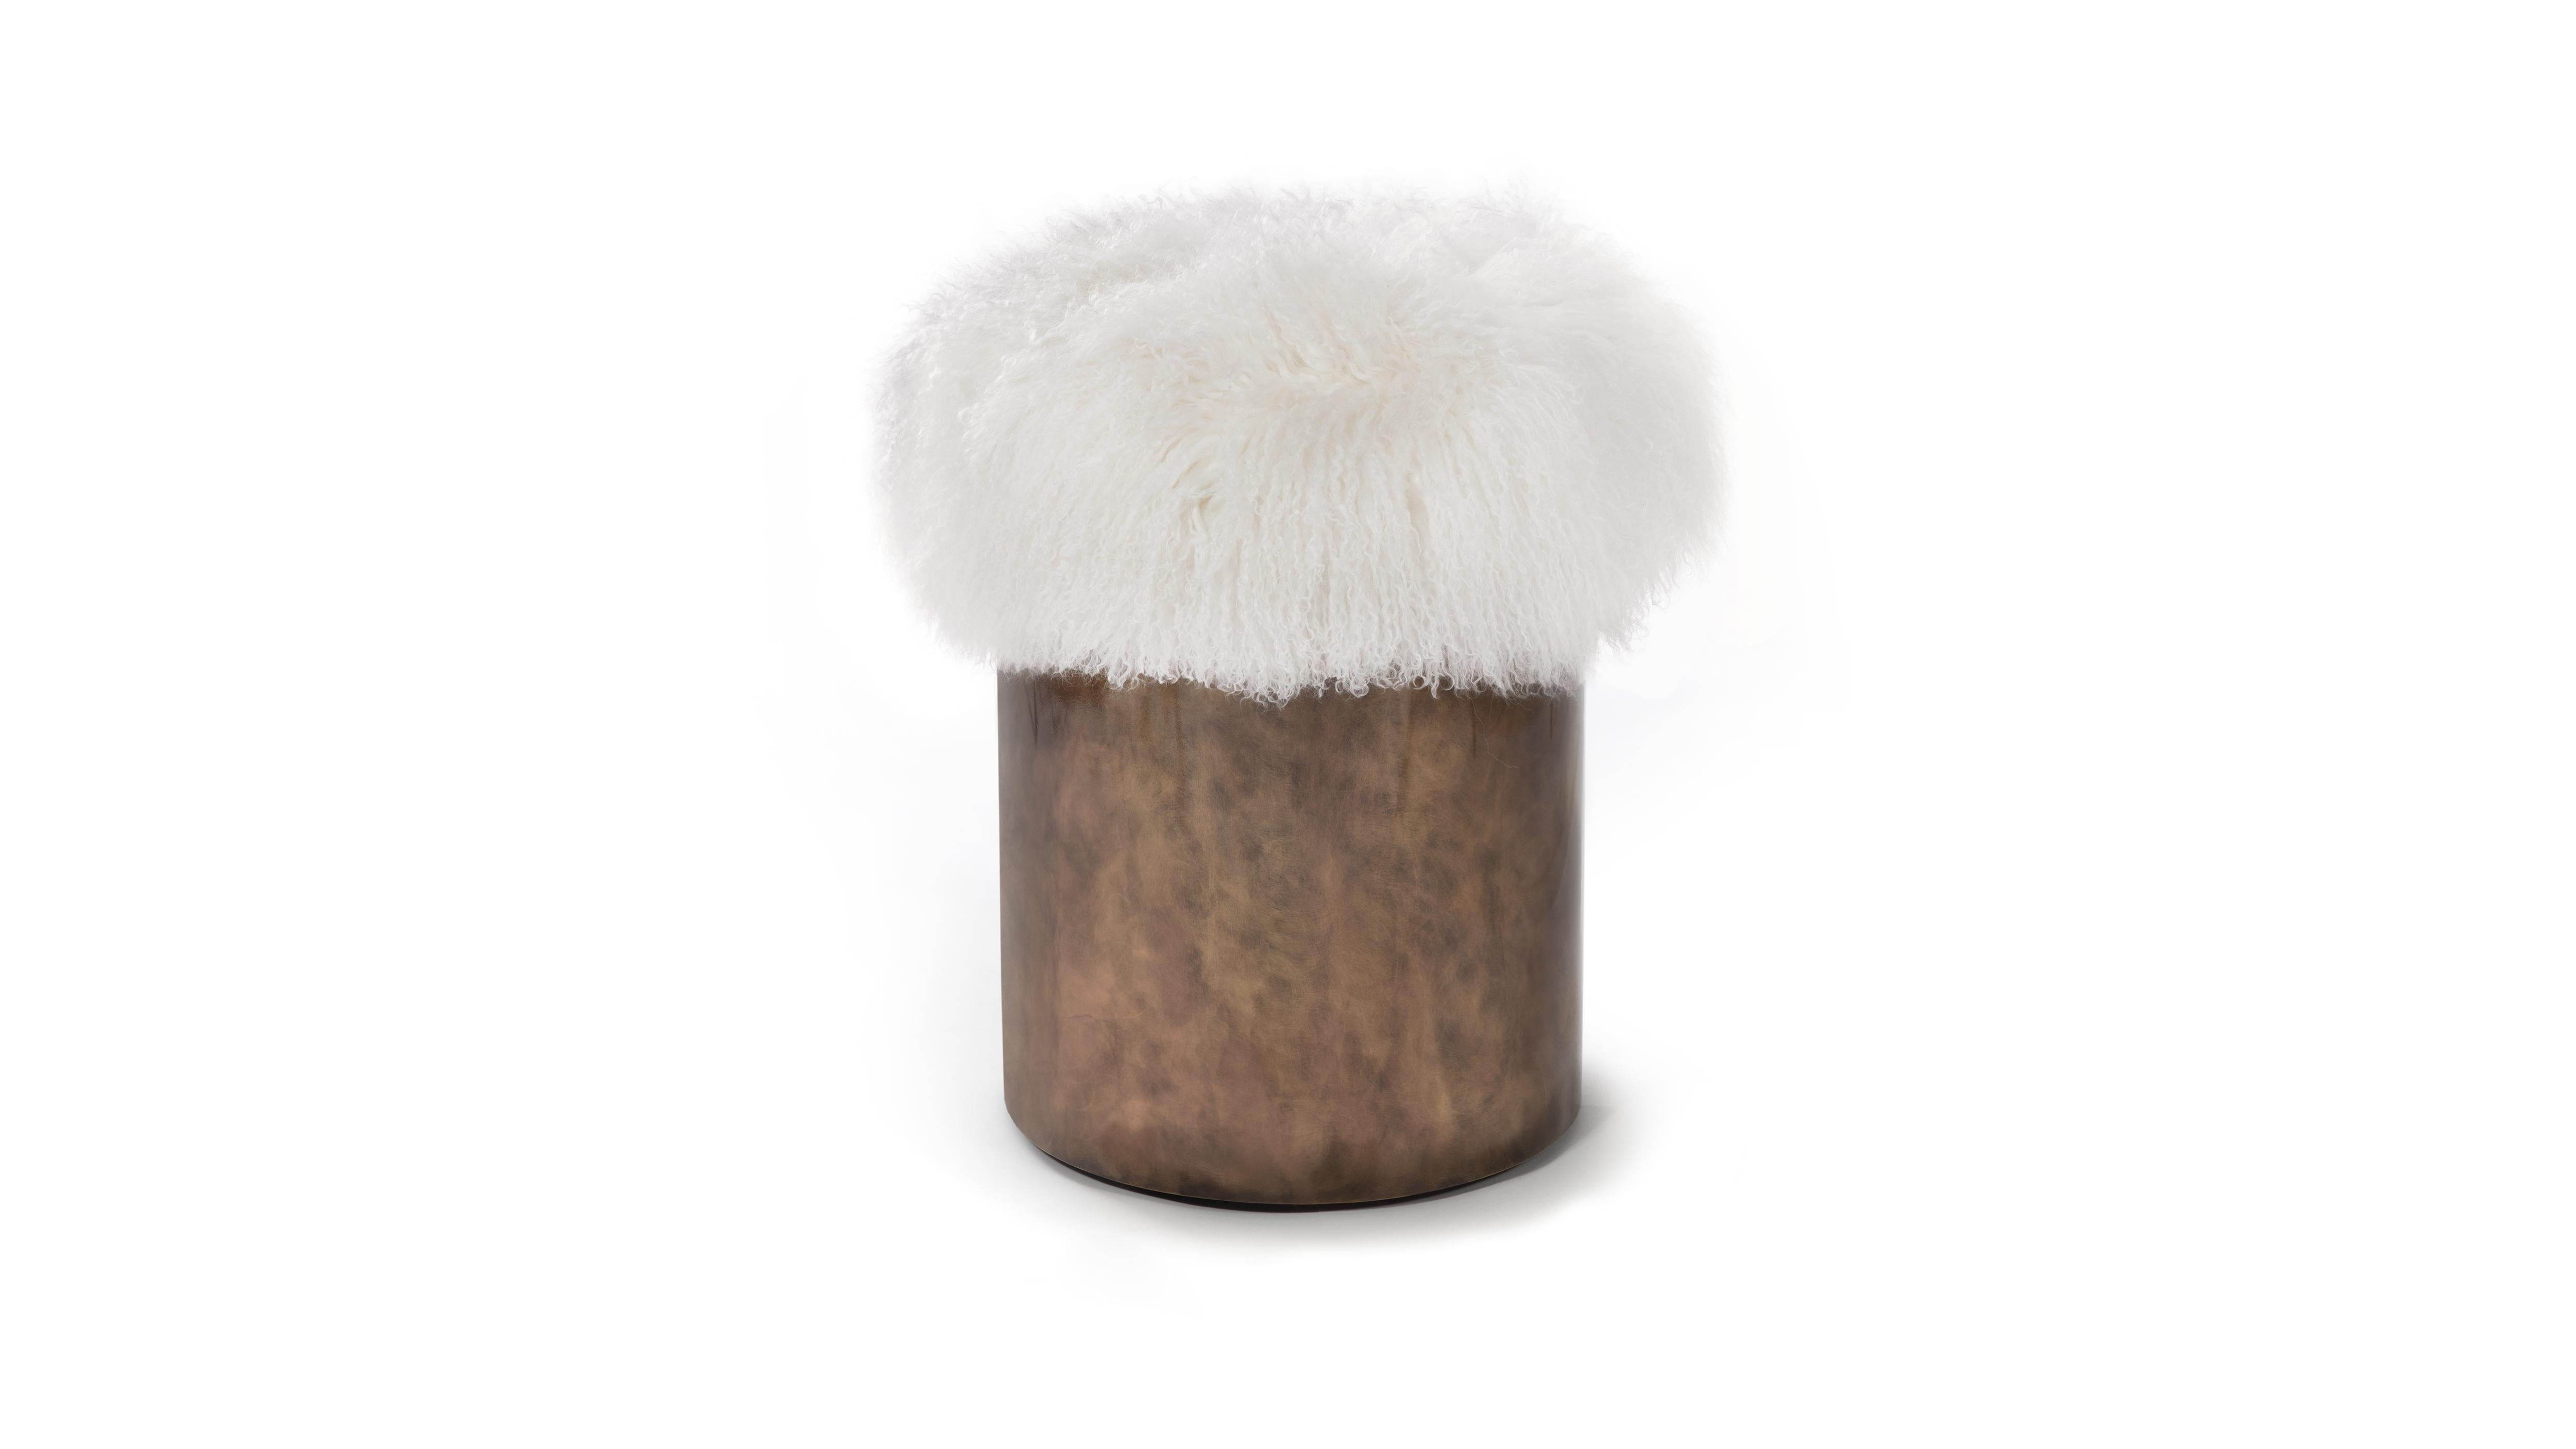 Symphony Stool by InsidherLand
Dimensions: D 41 x W 41 x H 50 cm.
Materials: Rustic oxidized brushed brass, Mongolian Lamb fur Ref. White.
10 kg.

Recognized as one of the most exceptional composers of all time, Ludwig Van Beethoven was born in 1770